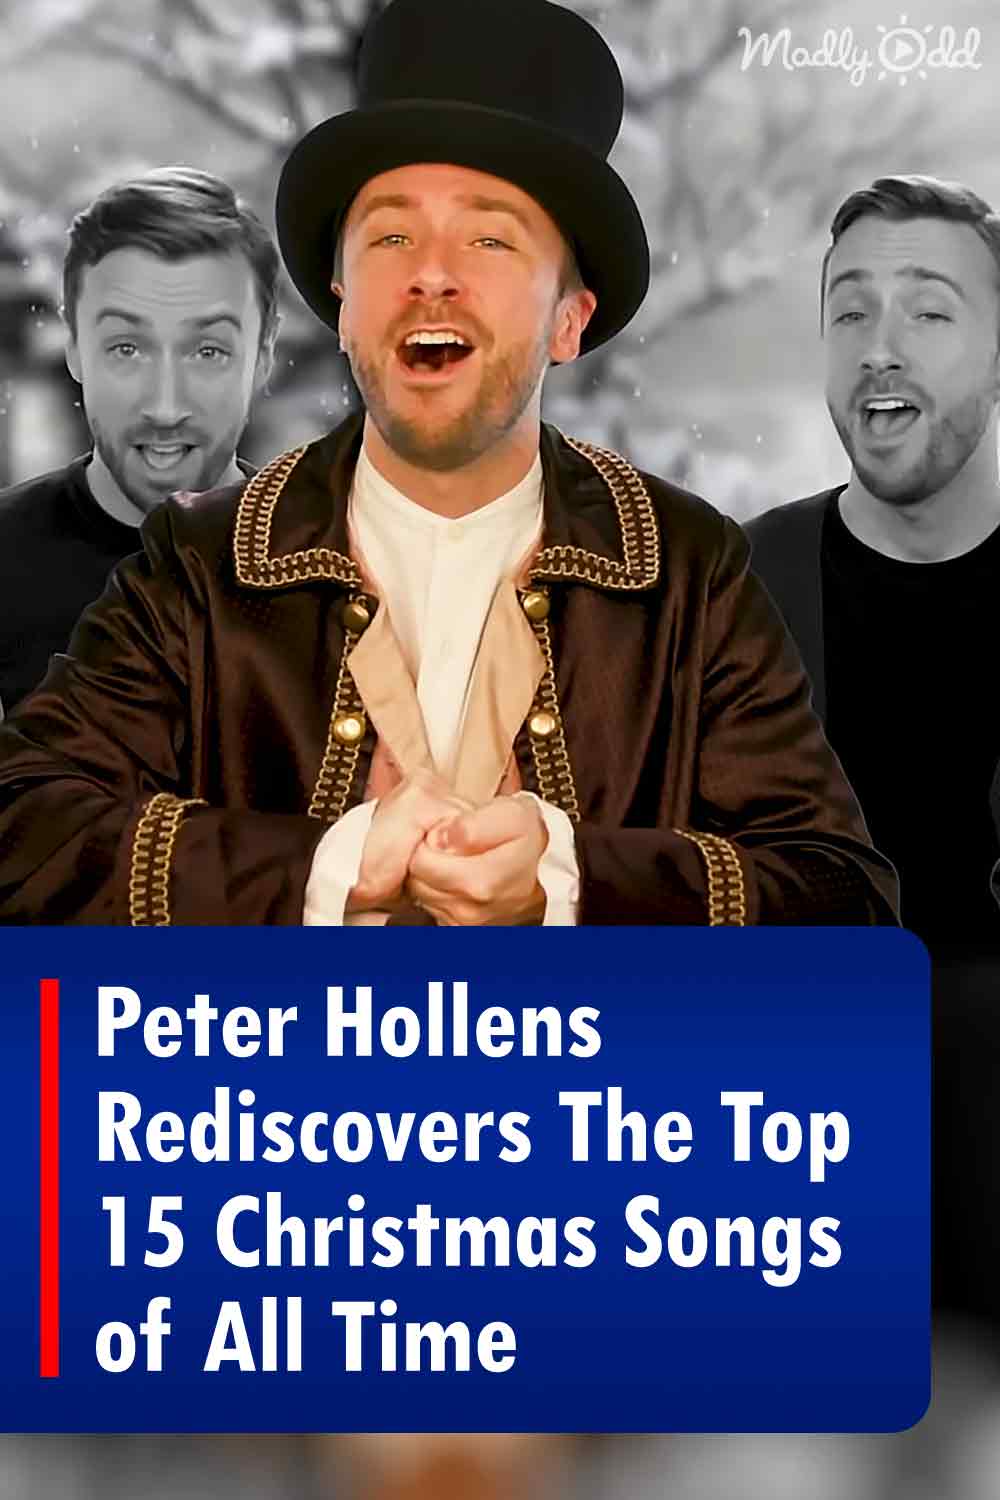 Peter Hollens Rediscovers The Top 15 Christmas Songs of All Time